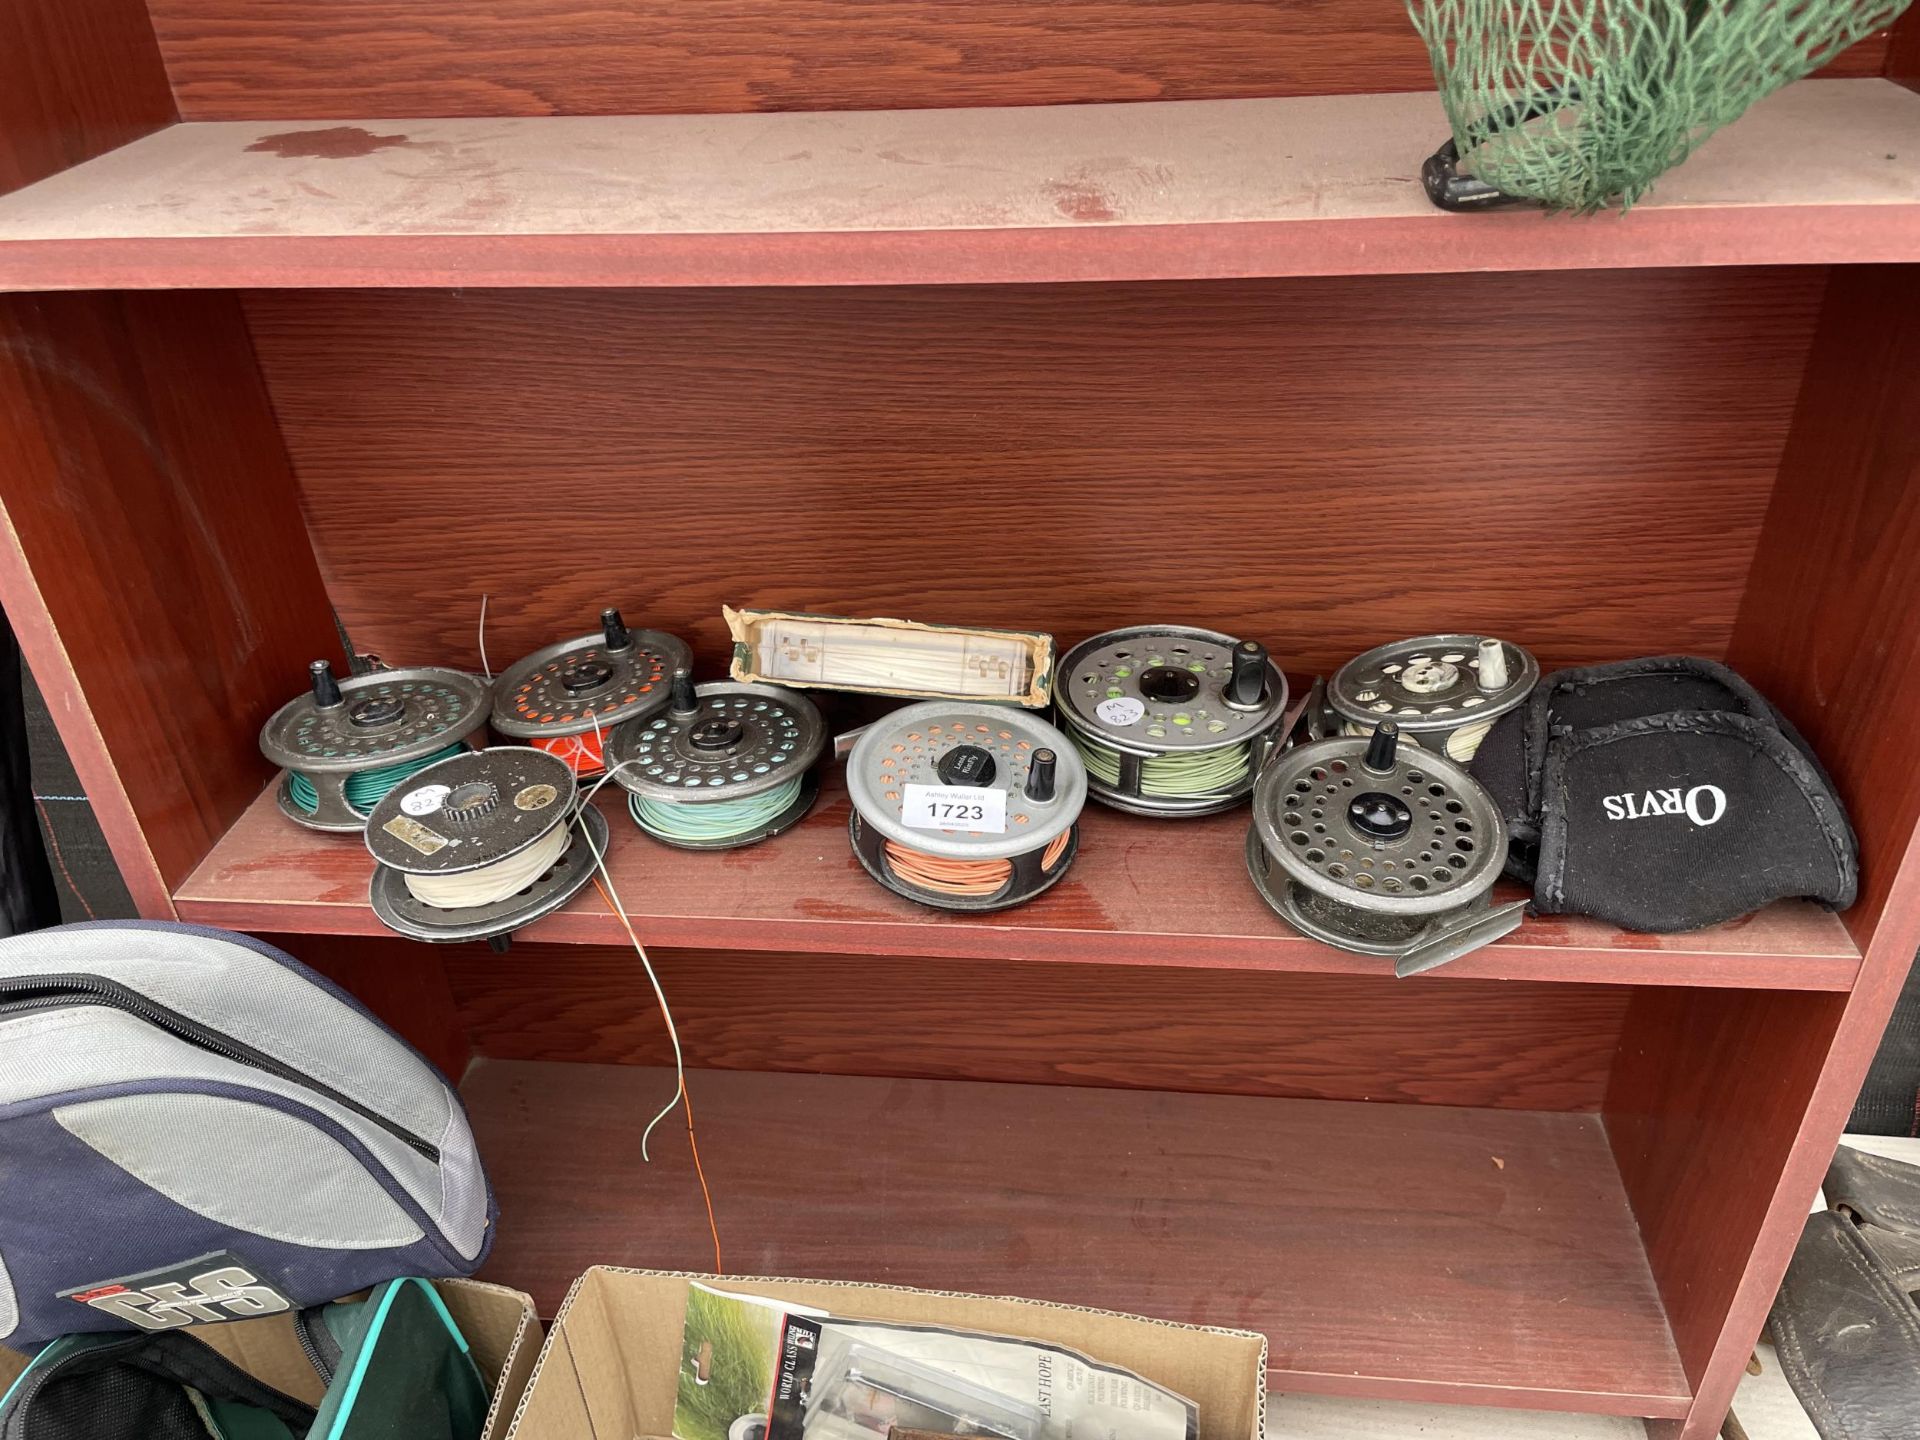 EIGHT VARIOUS FLY FISHING REELS AND A SPOOL OF FLY LINE